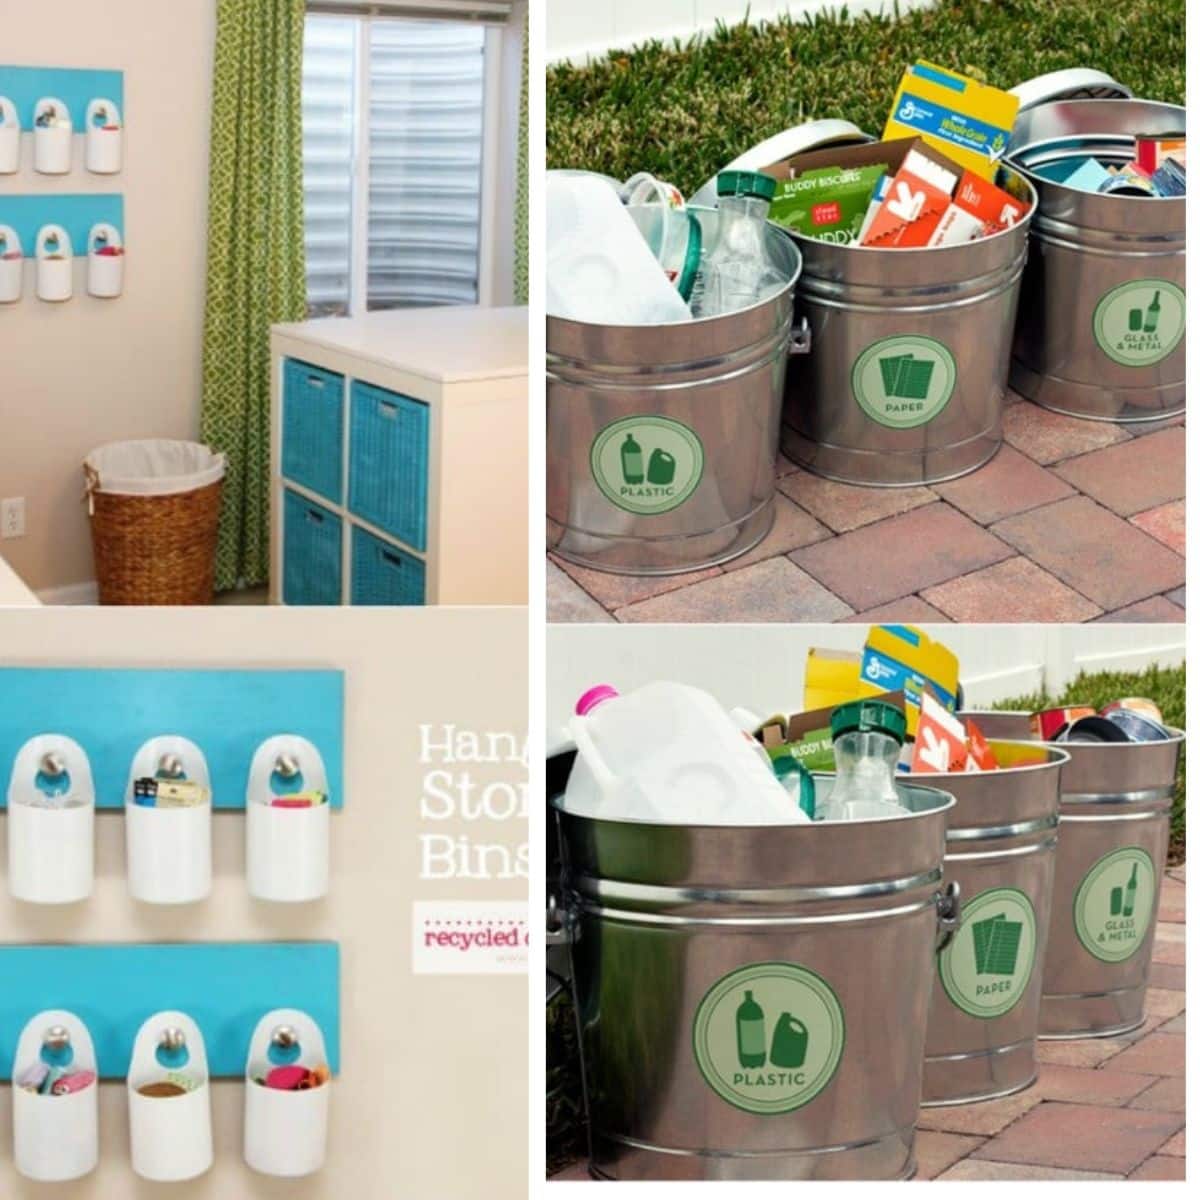 20 DIY Home Recycling Bins That Help You Organize Your Recyclables